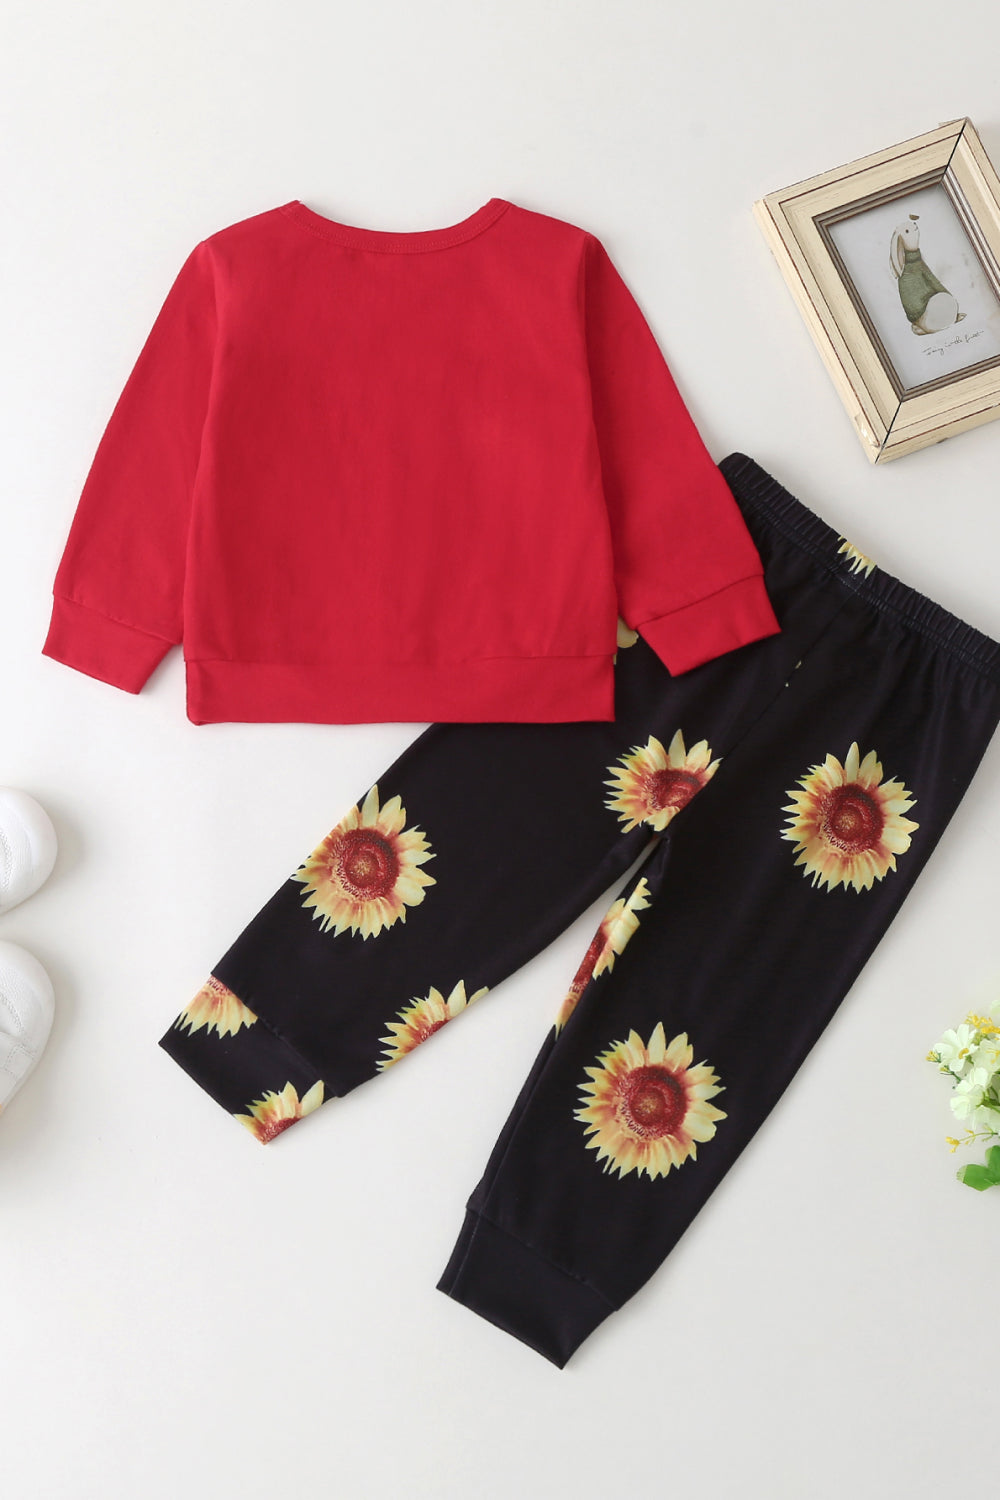 Girls Letter Top and Sunflower Pants Set